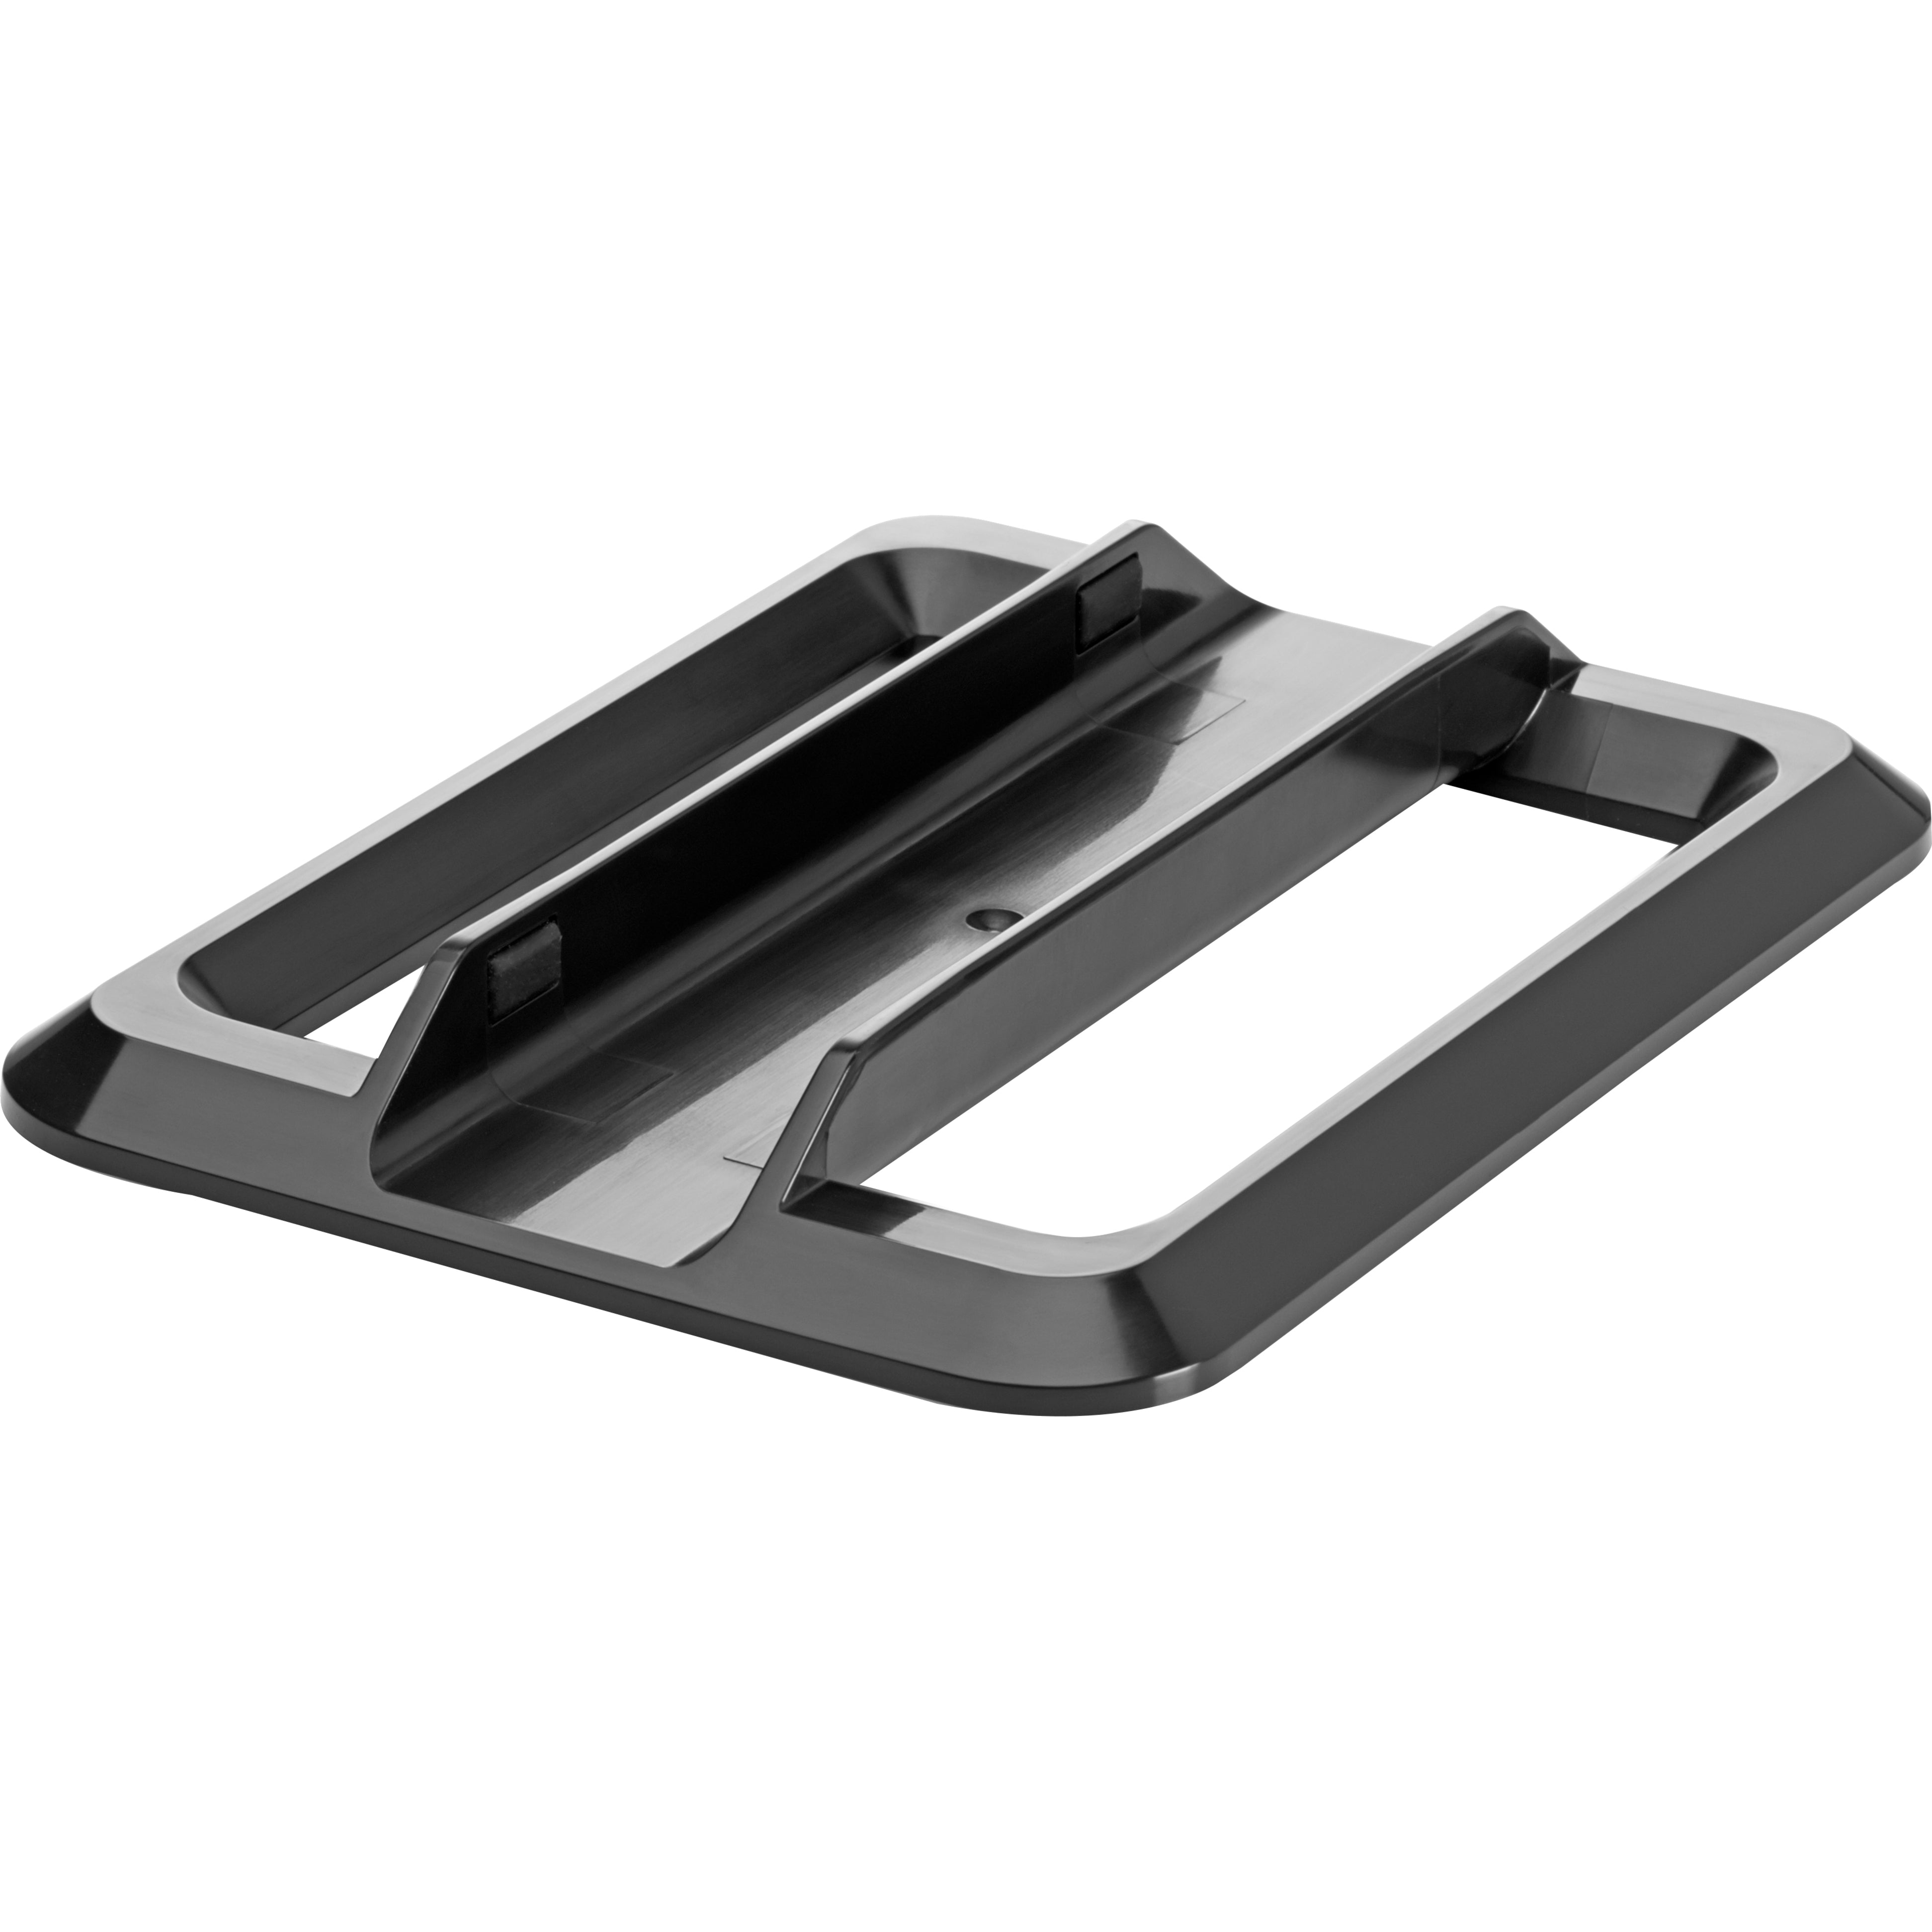 HP Desktop Mini Chassis Tower Stand [Discontinued]